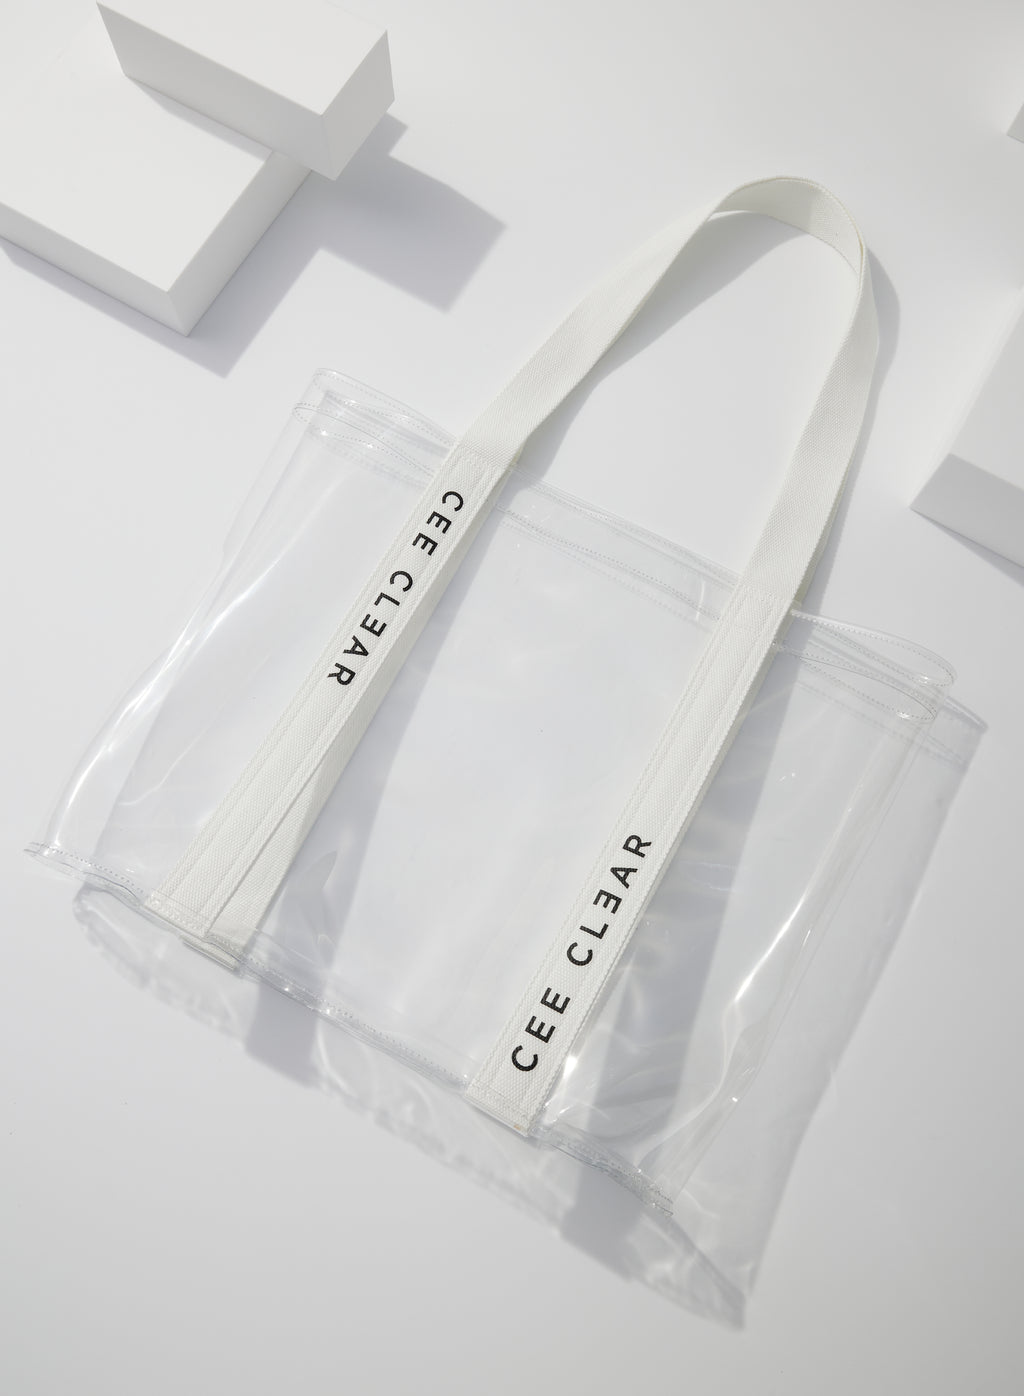 CEE CLEAR | Cases, Bags and Purses for Living Clearly